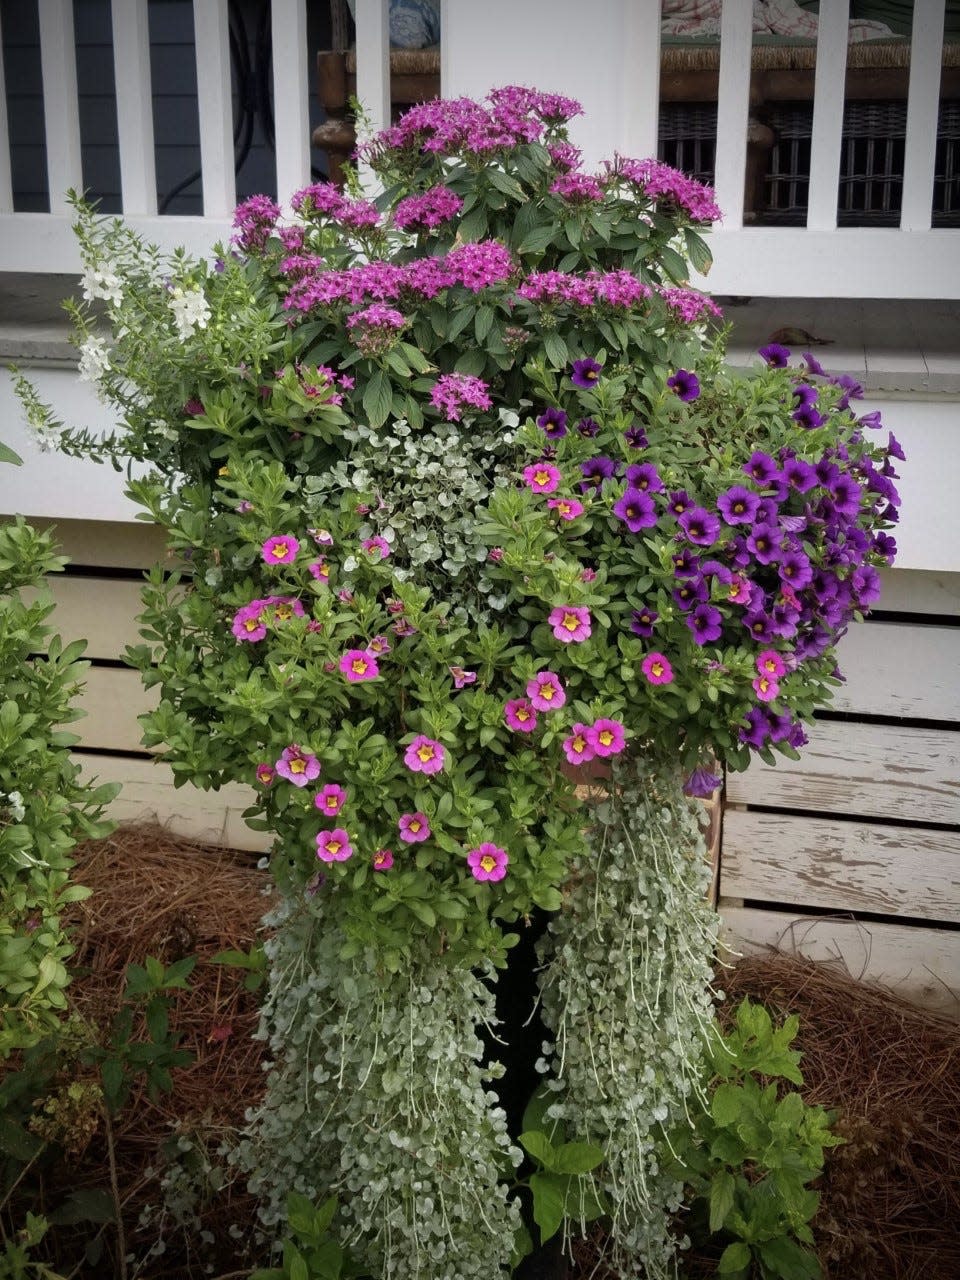 This floating border column basket has its pole of support covered by long trails of Silver Falls dichondra. Supertunia petunias, Superbells calibrachoas and Sunstar pentas make colorful partners.